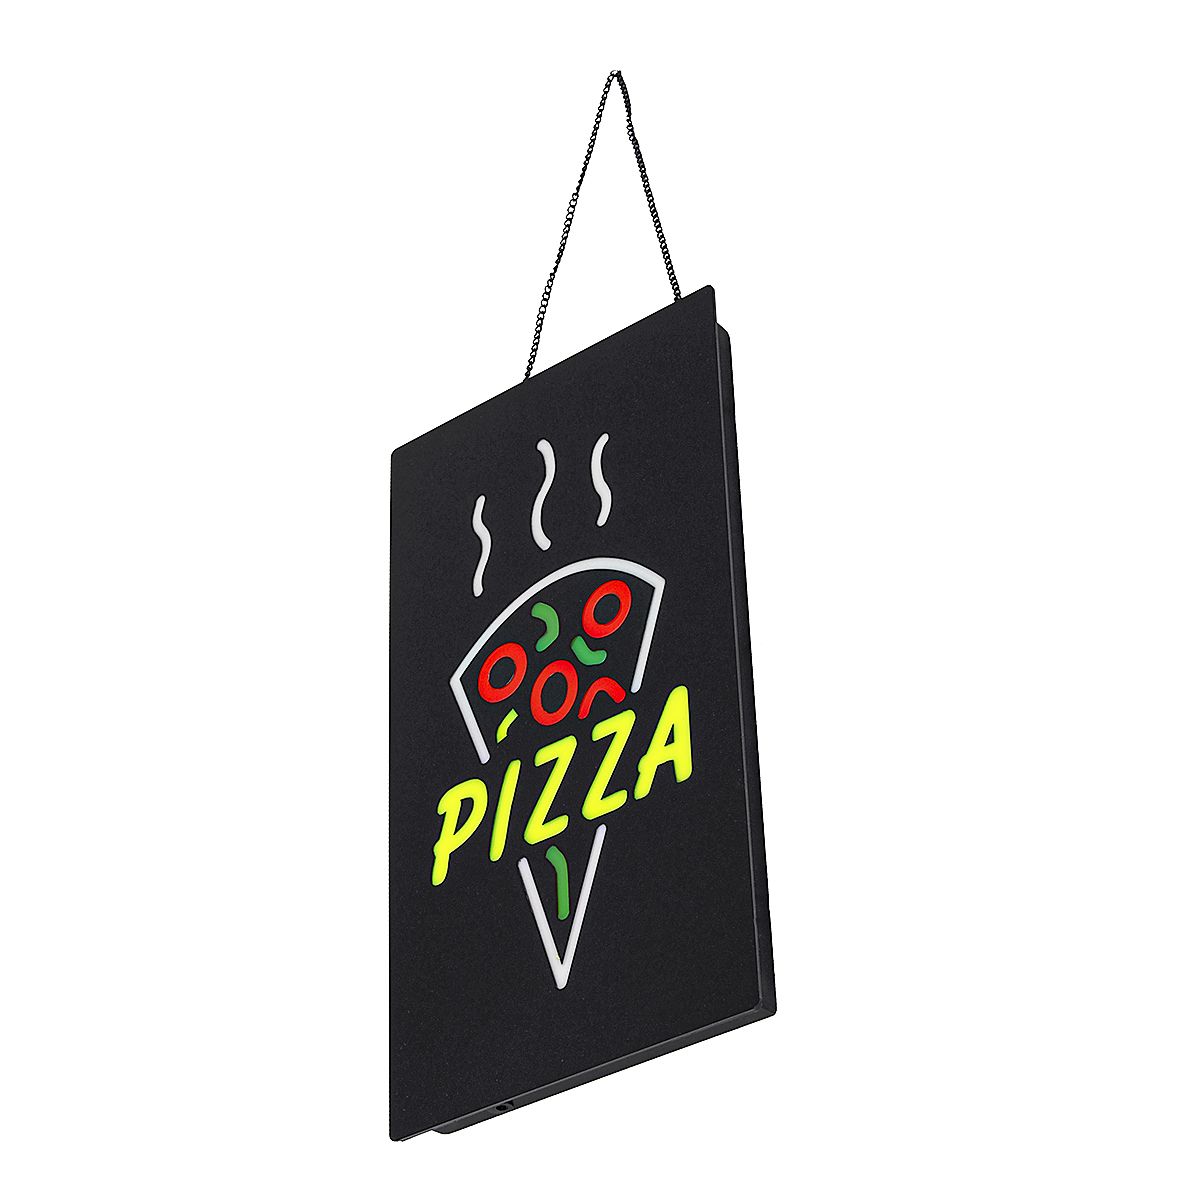 Pizza-LED-Wall-Hanging-Sign-Light-Board-Pub-Club-Party-Door-Display-Lamp-Decorations-1660374